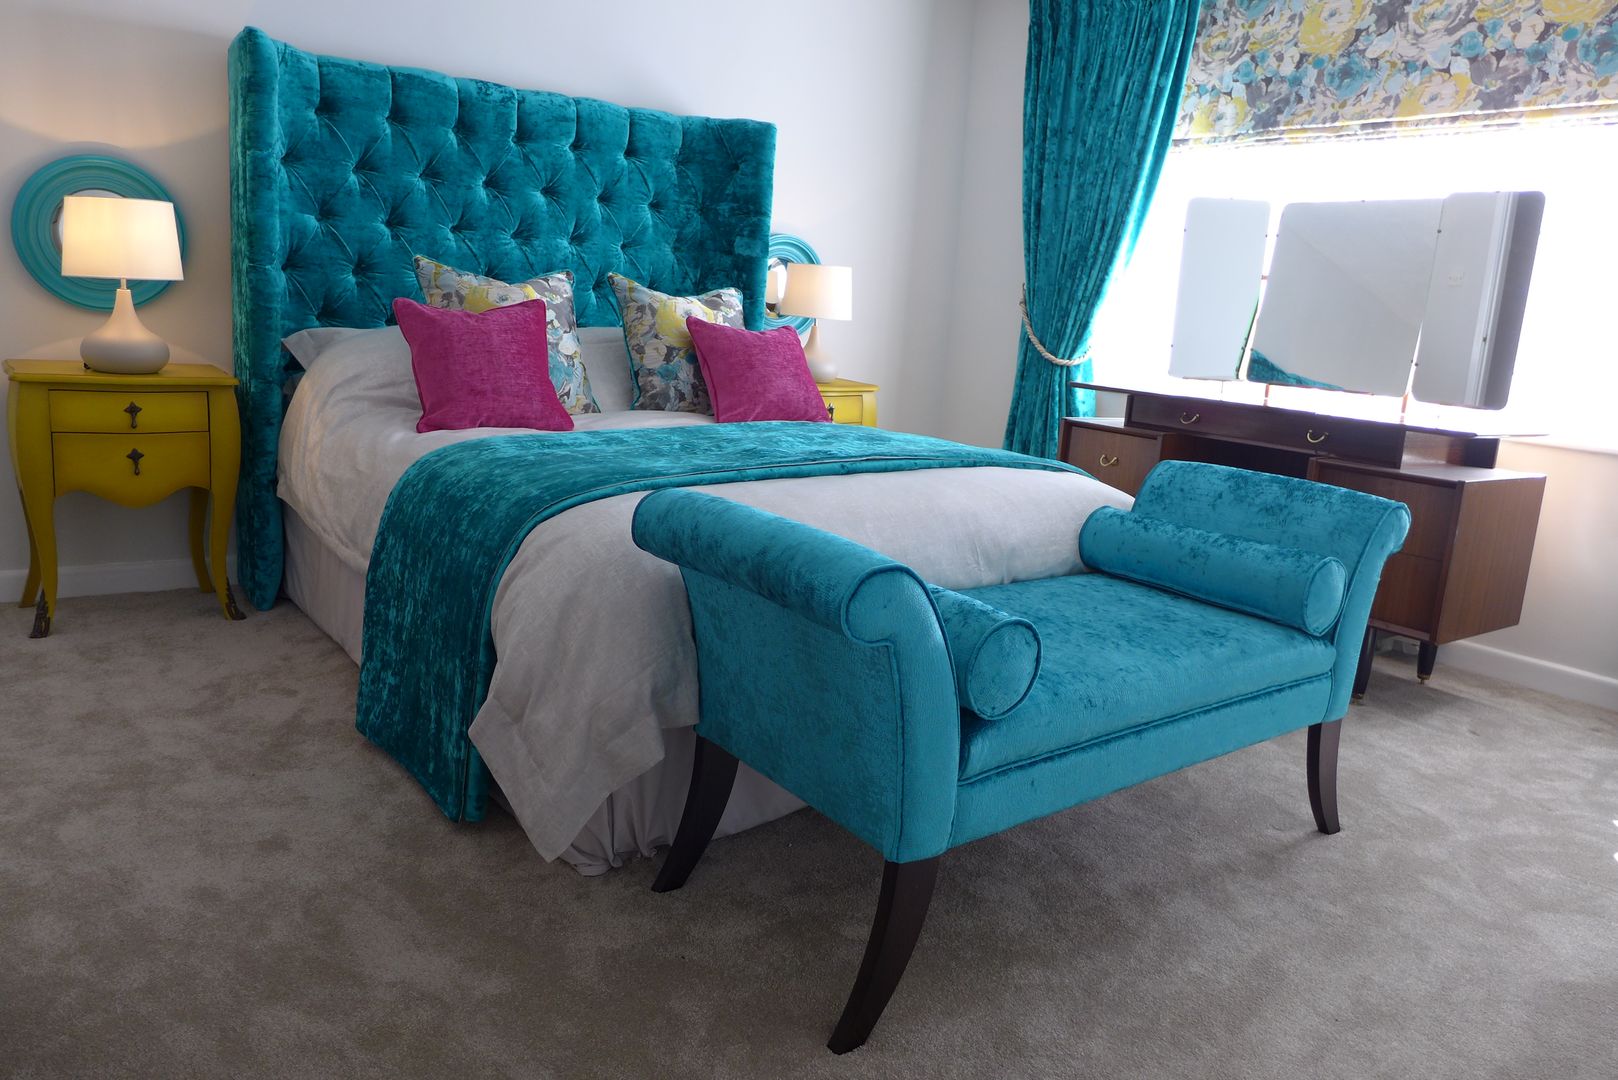 hotel style bedroom Style Within Quartos clássicos bed end chaise,blue velvet,dress curtains,roman blind,pink accents,velvet headboard,fabric headboard,boutique bedroom,hotel style bedroom